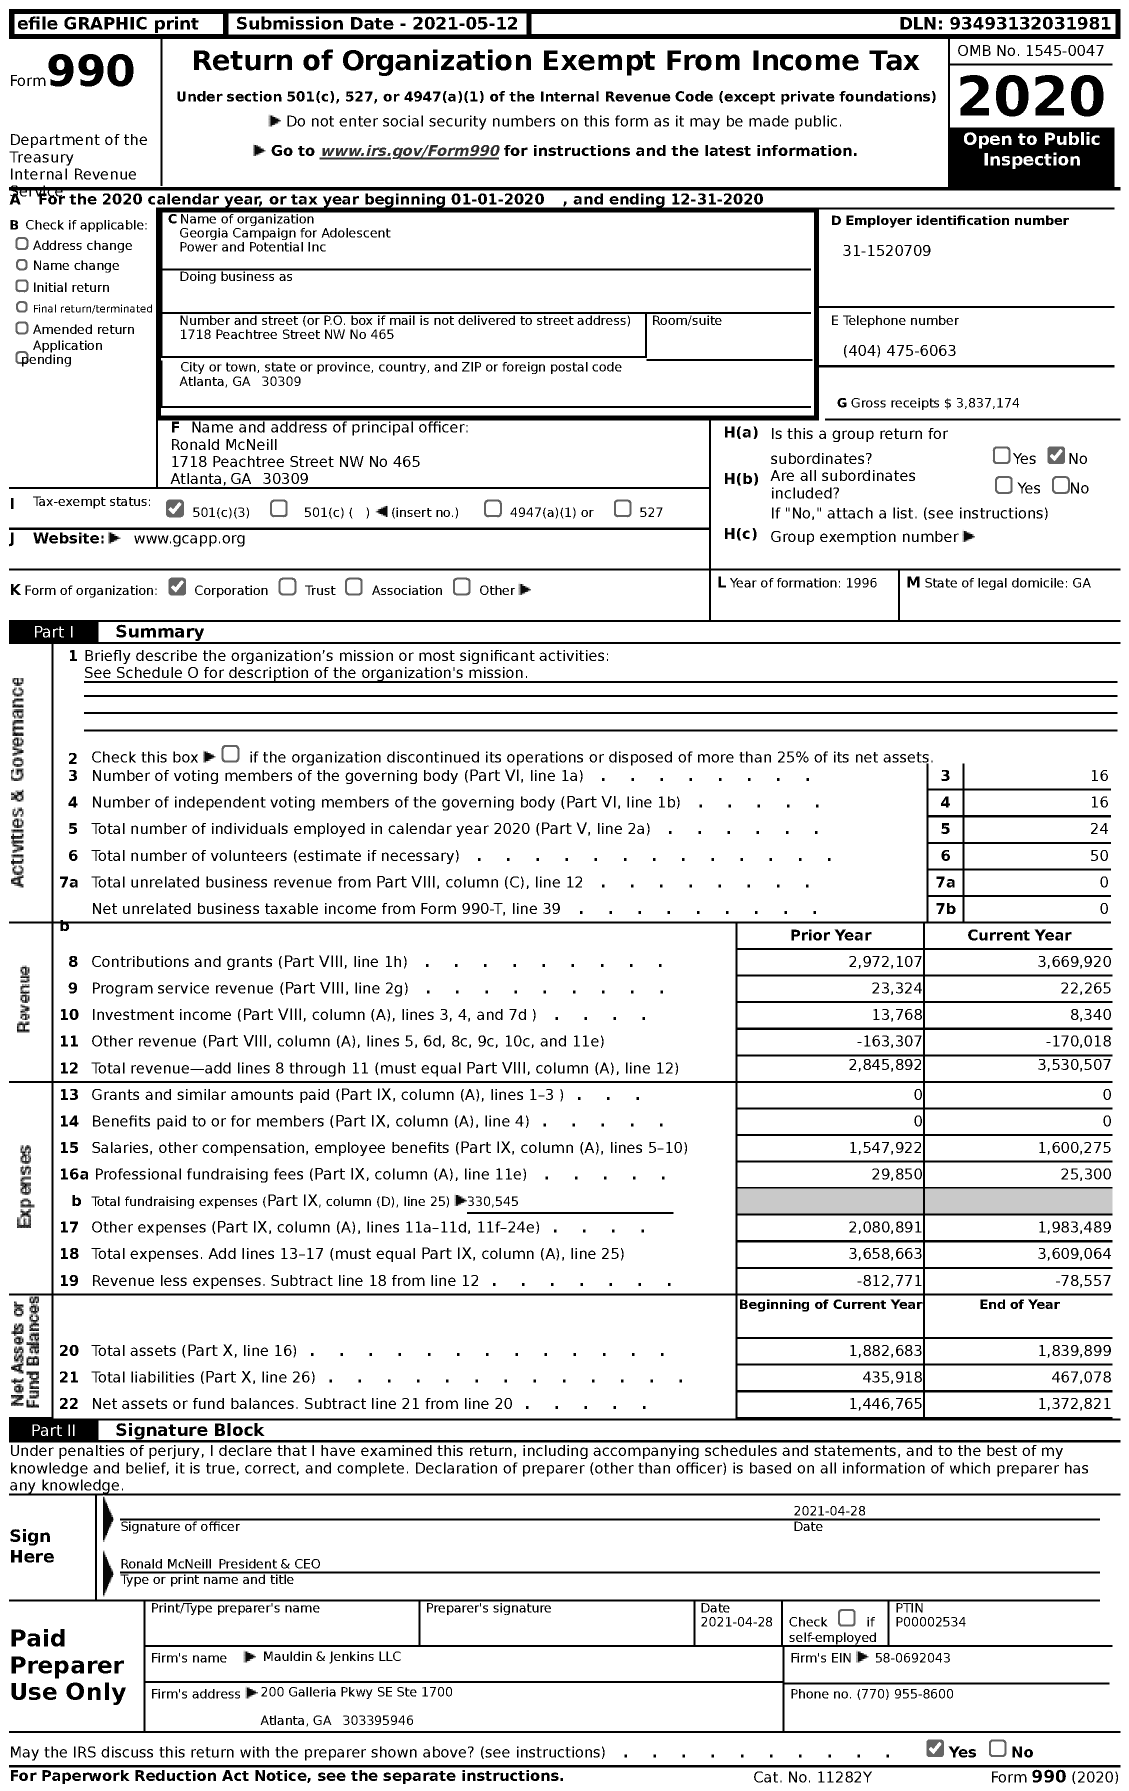 Image of first page of 2020 Form 990 for Georgia Campaign for Adolescent Power and Potential (GCAPP)